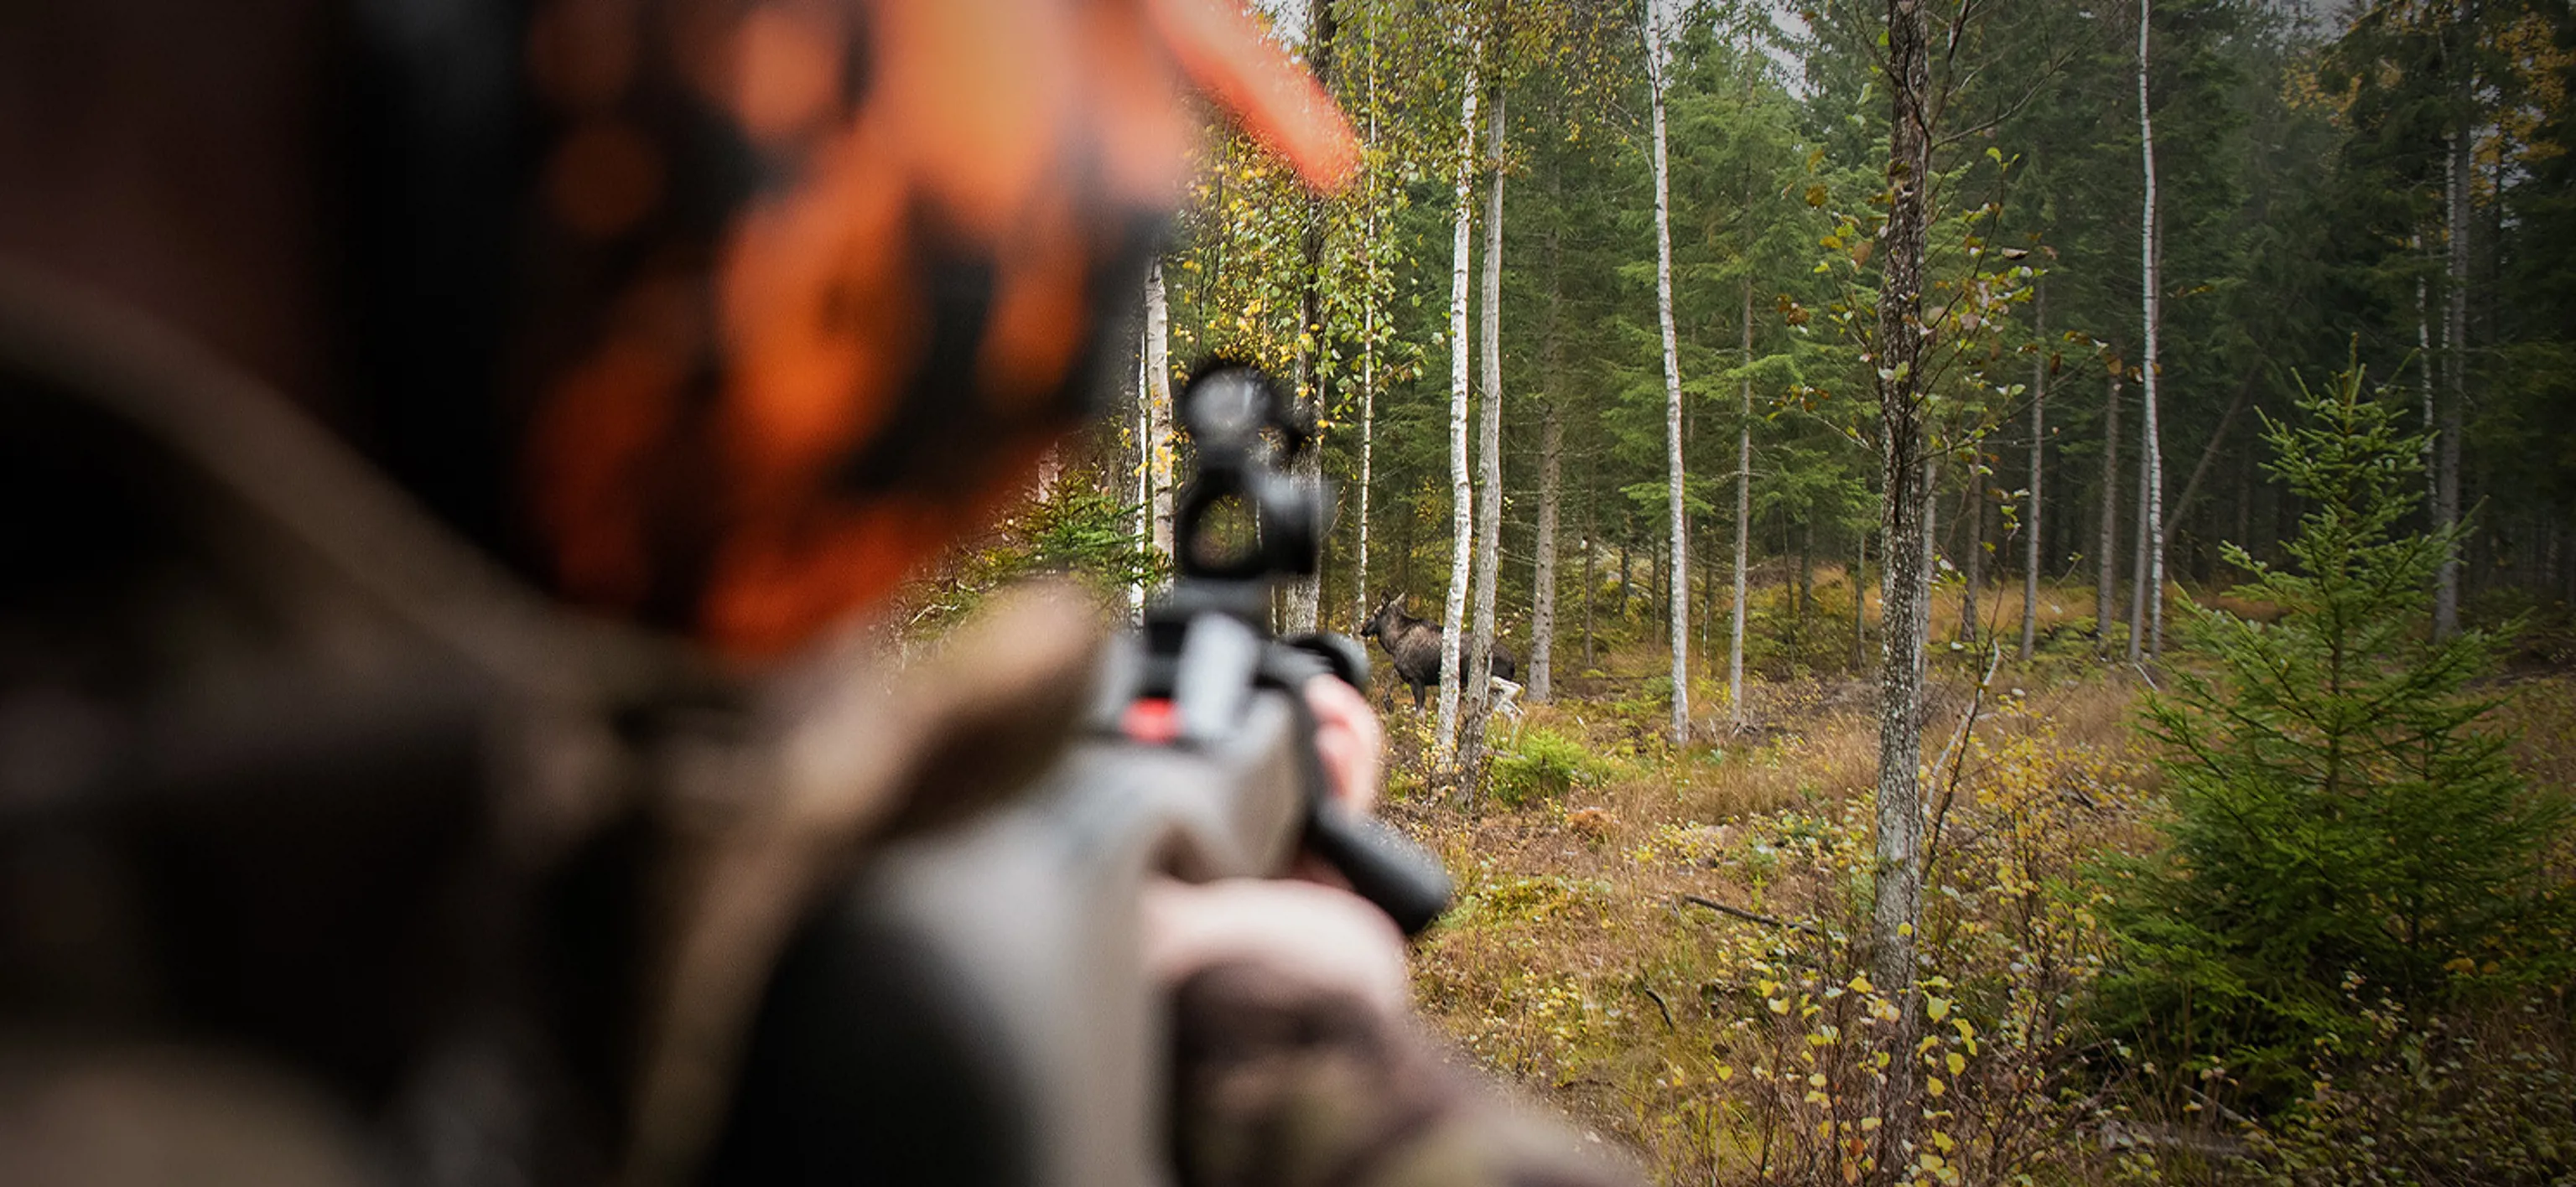 New Aimpoint Story - Moose Hunting with a Red Dot Sight